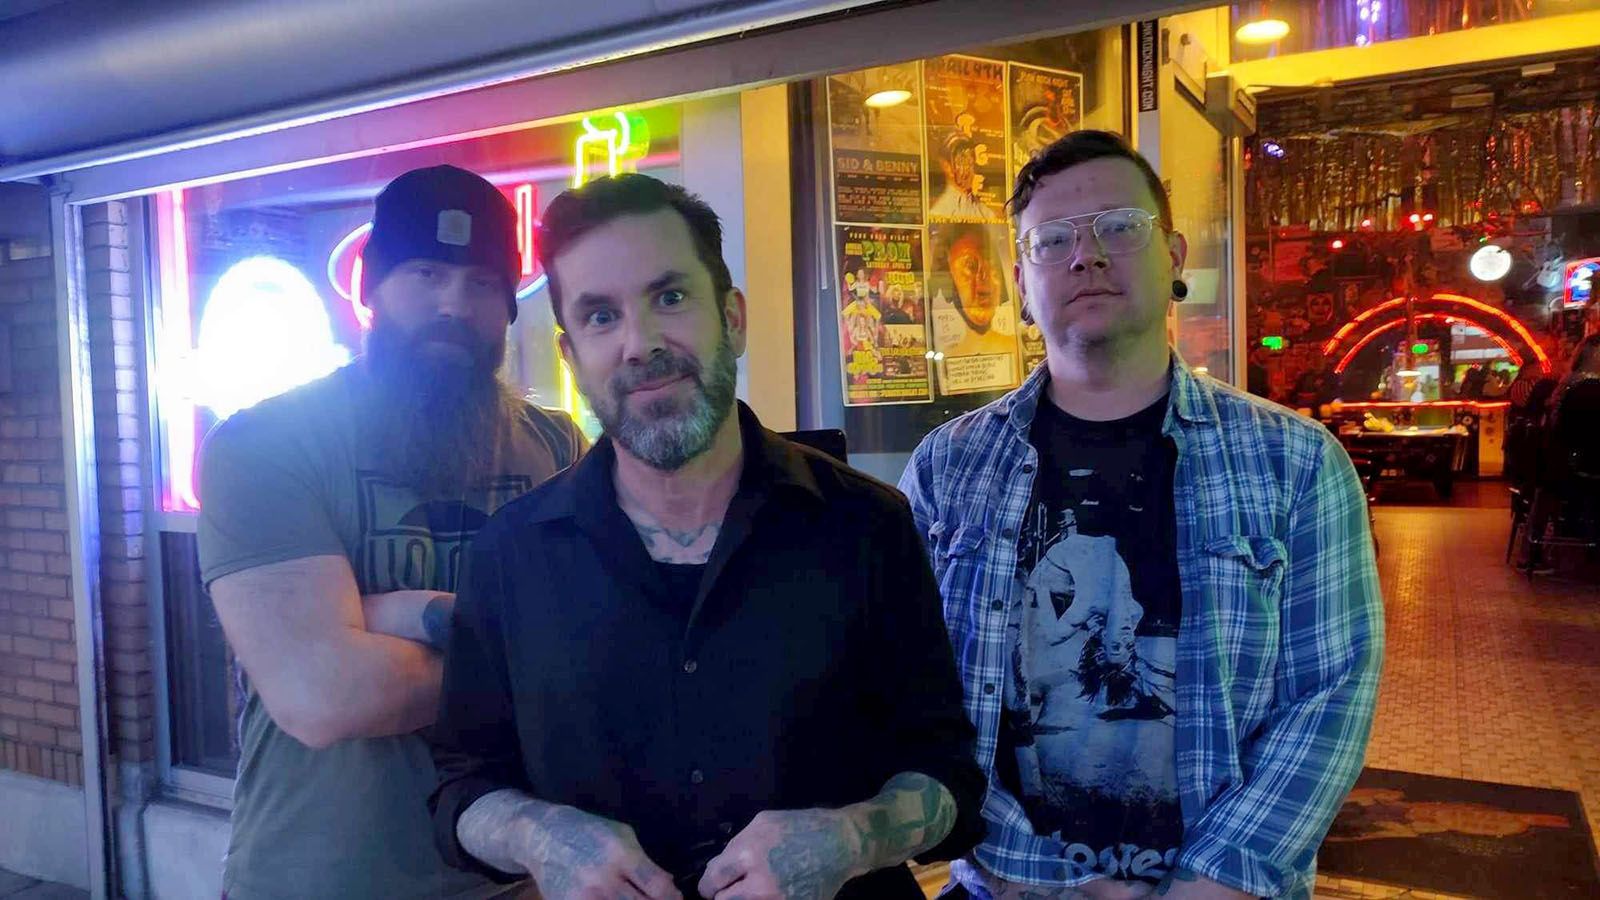 Snakehandler Church, from left, Matt Belcher, Pete Dio, and Drew Snyder, will celebrate their latest release, Top Notch Heavy Rock, with a show at The Brass Rail on Friday, May 3.